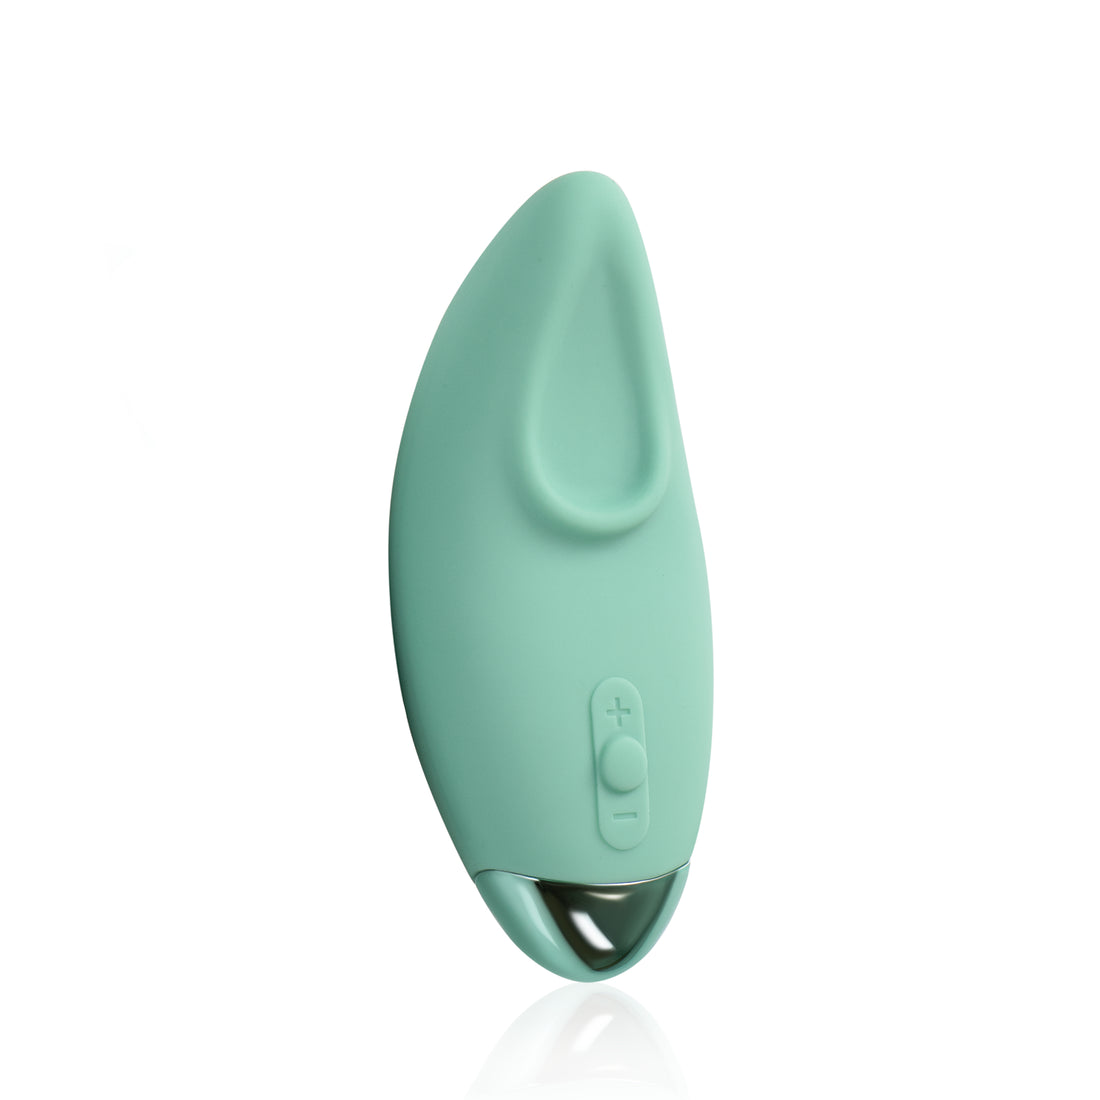 Side of the curved small vibrator Form 3 green or teal by JimmyJane #pink